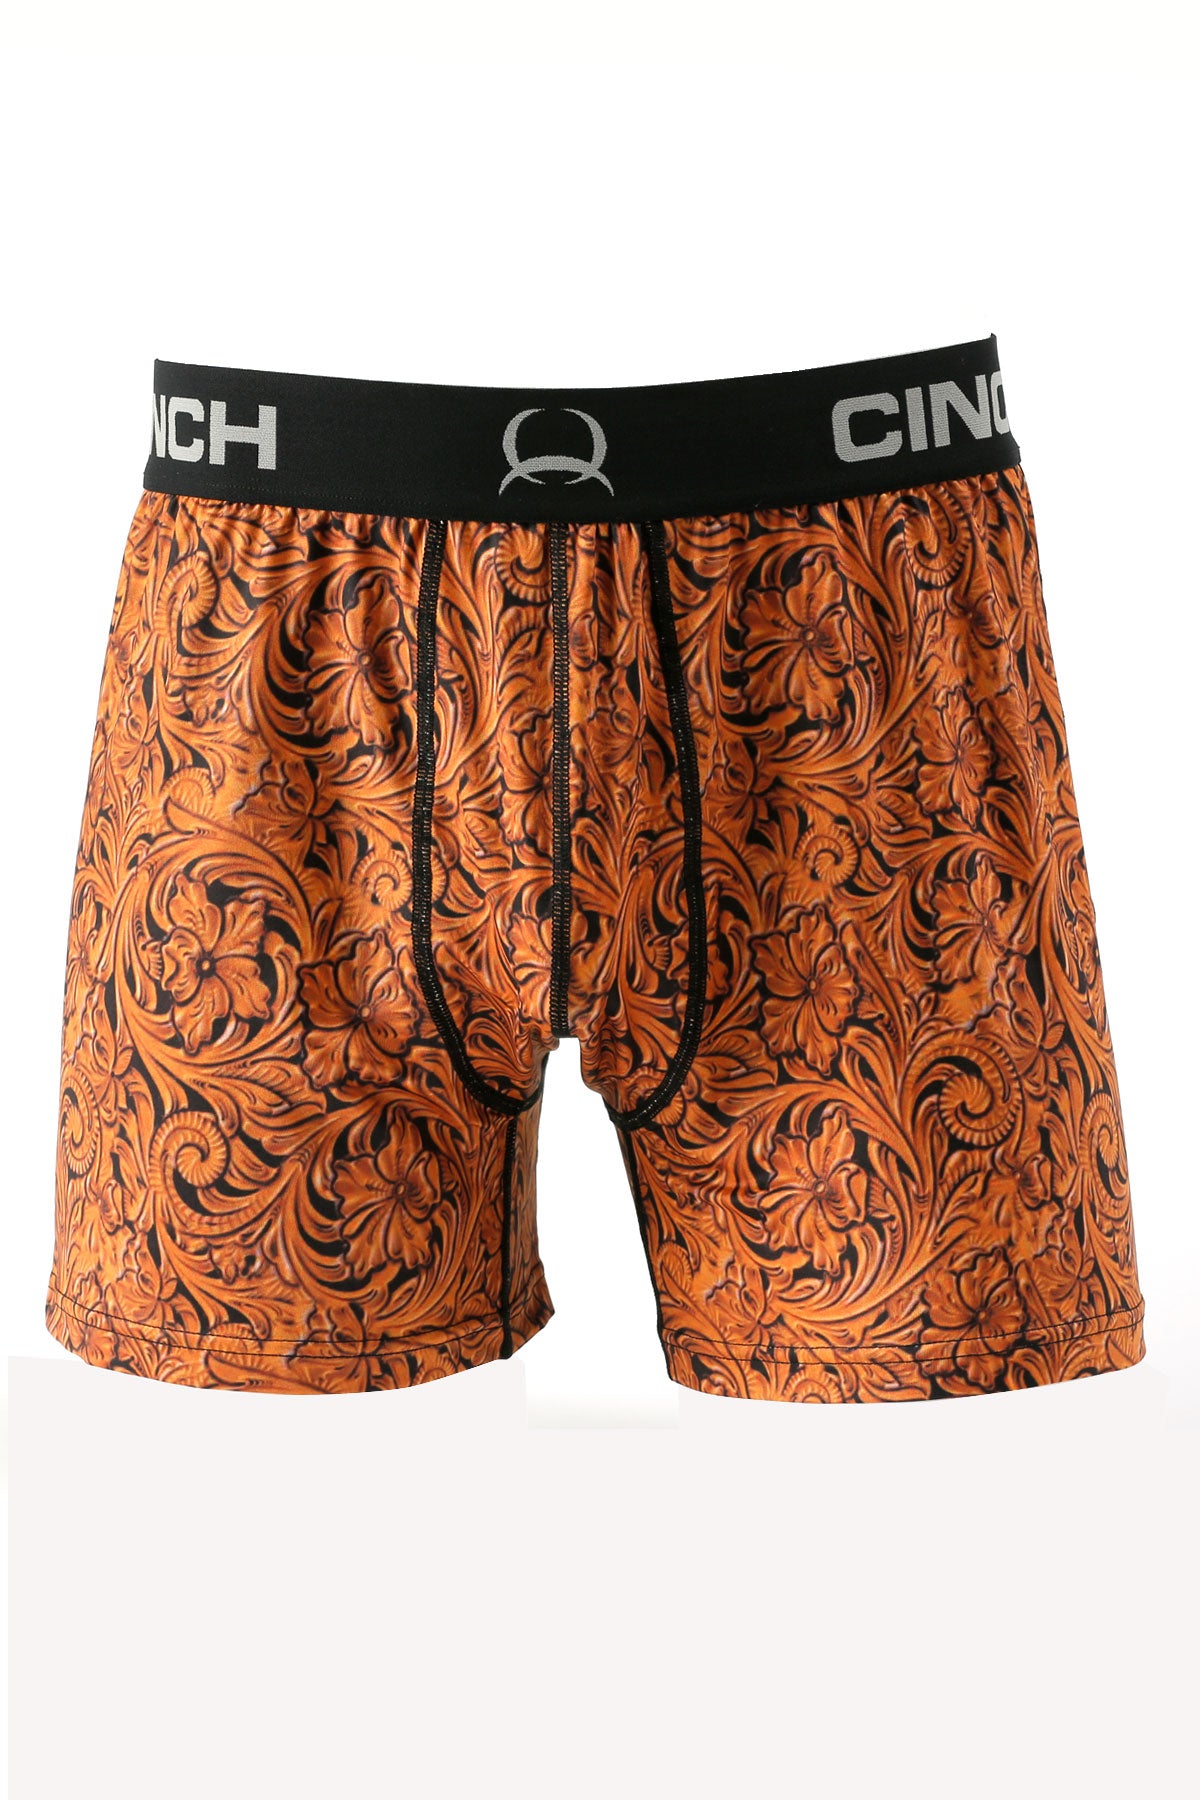 Cinch Tooled Leather Underwear